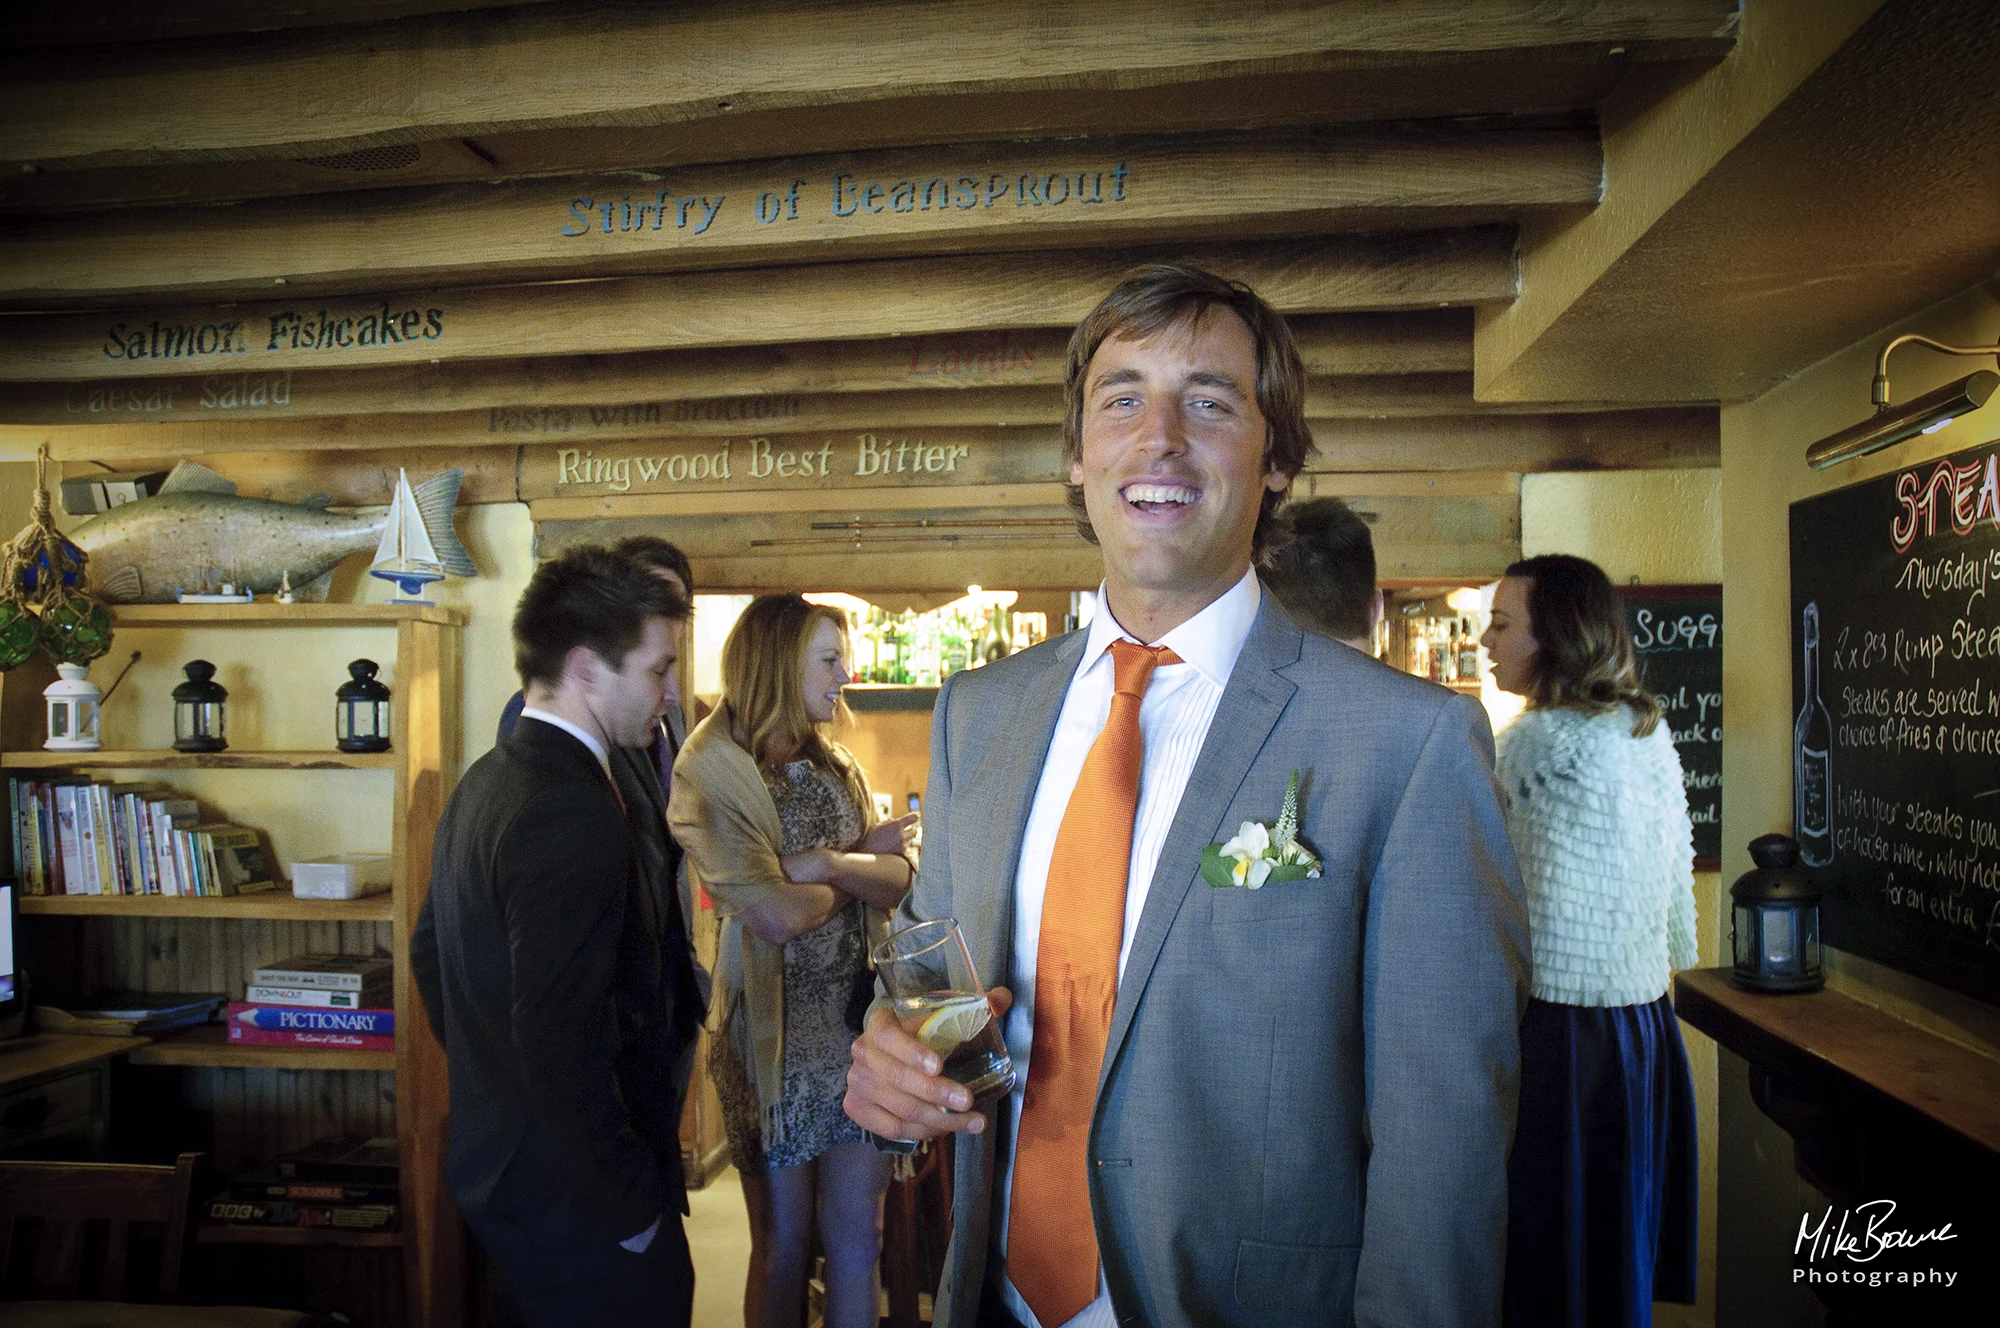 Man about to be married having pre wedding drink with guests in a pub